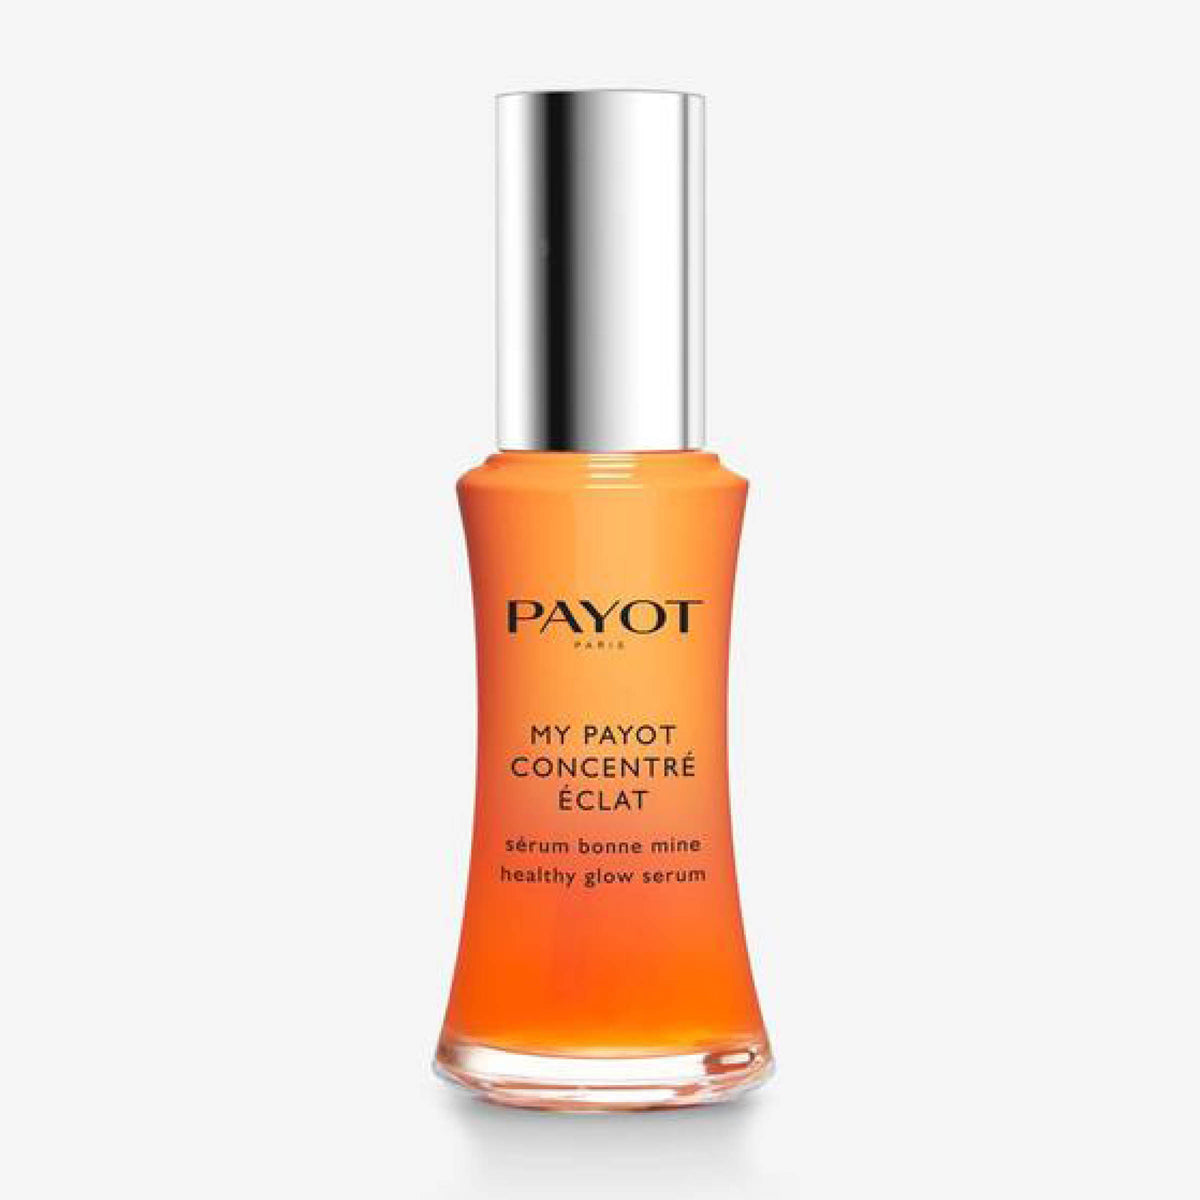 Payot My Payot Concentre Eclat 30ml